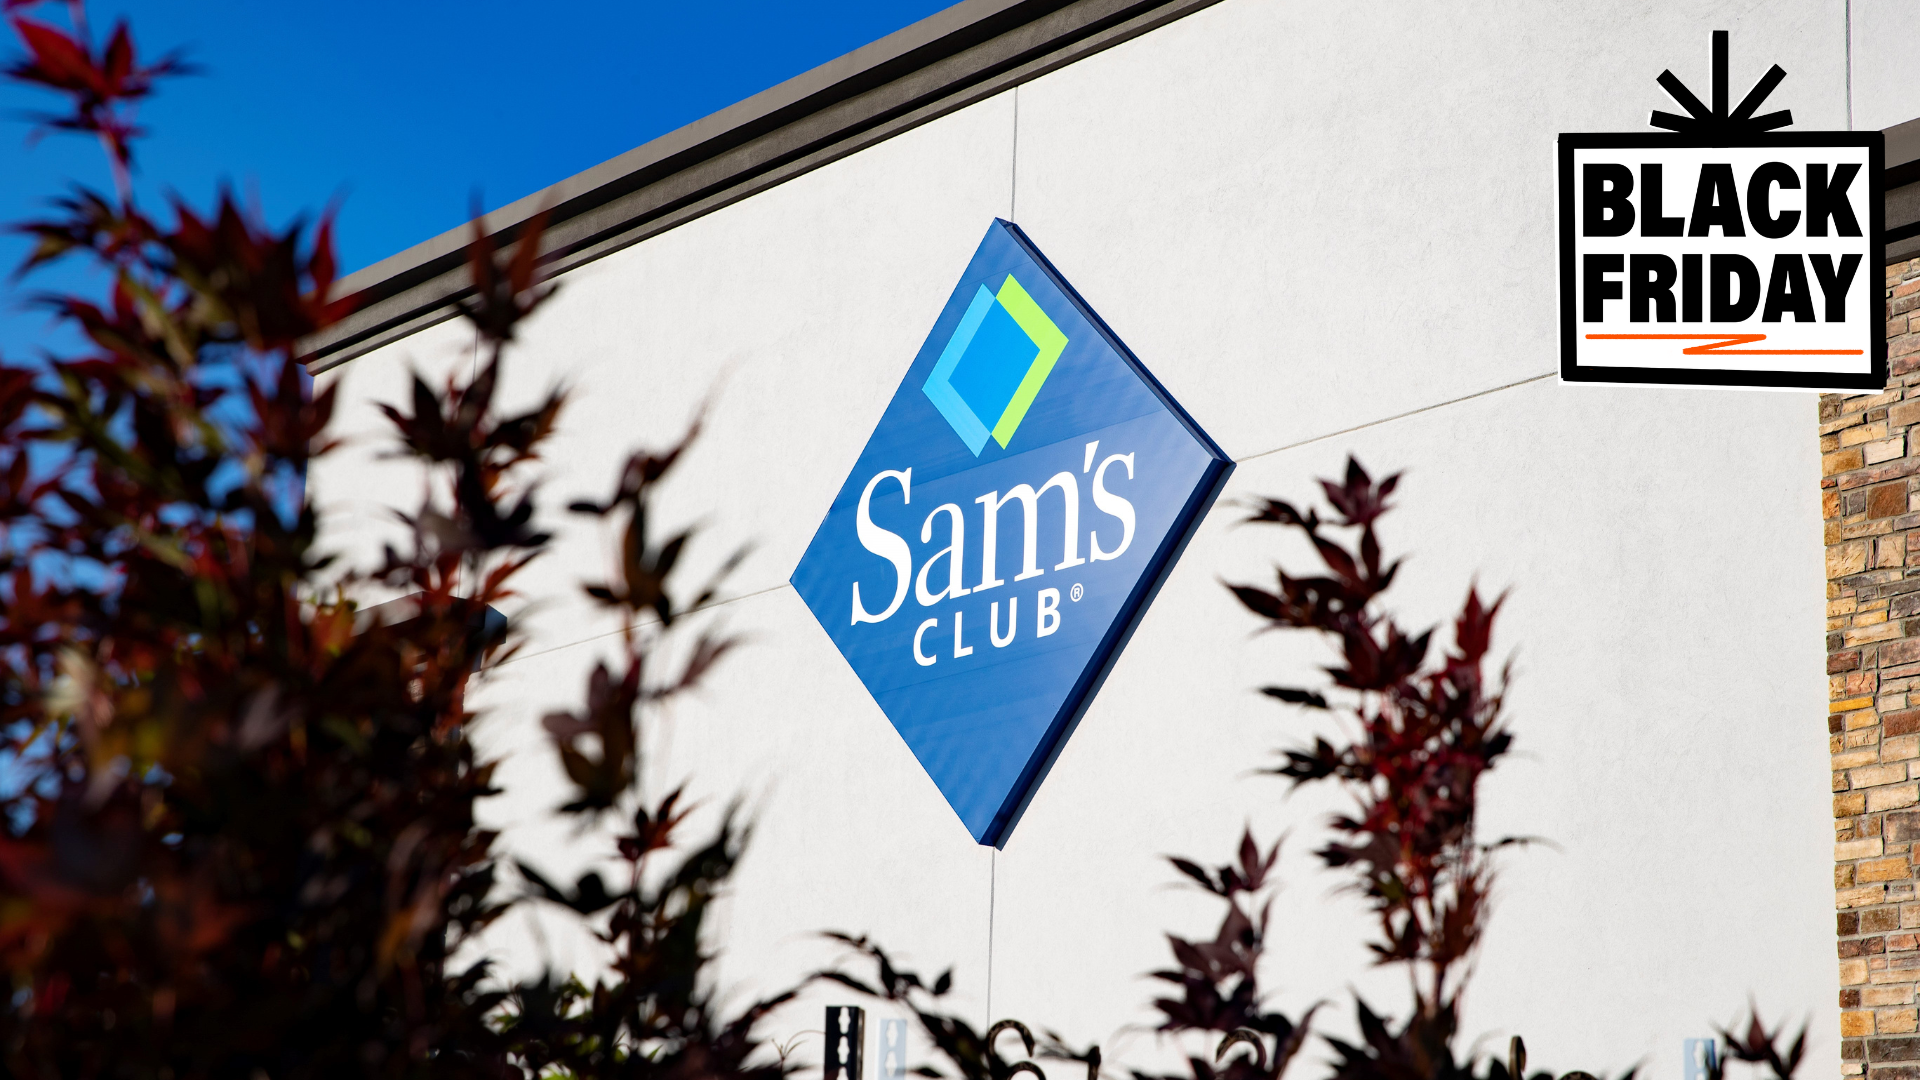 Sam's Club Black Friday deal: 50% off memberships today